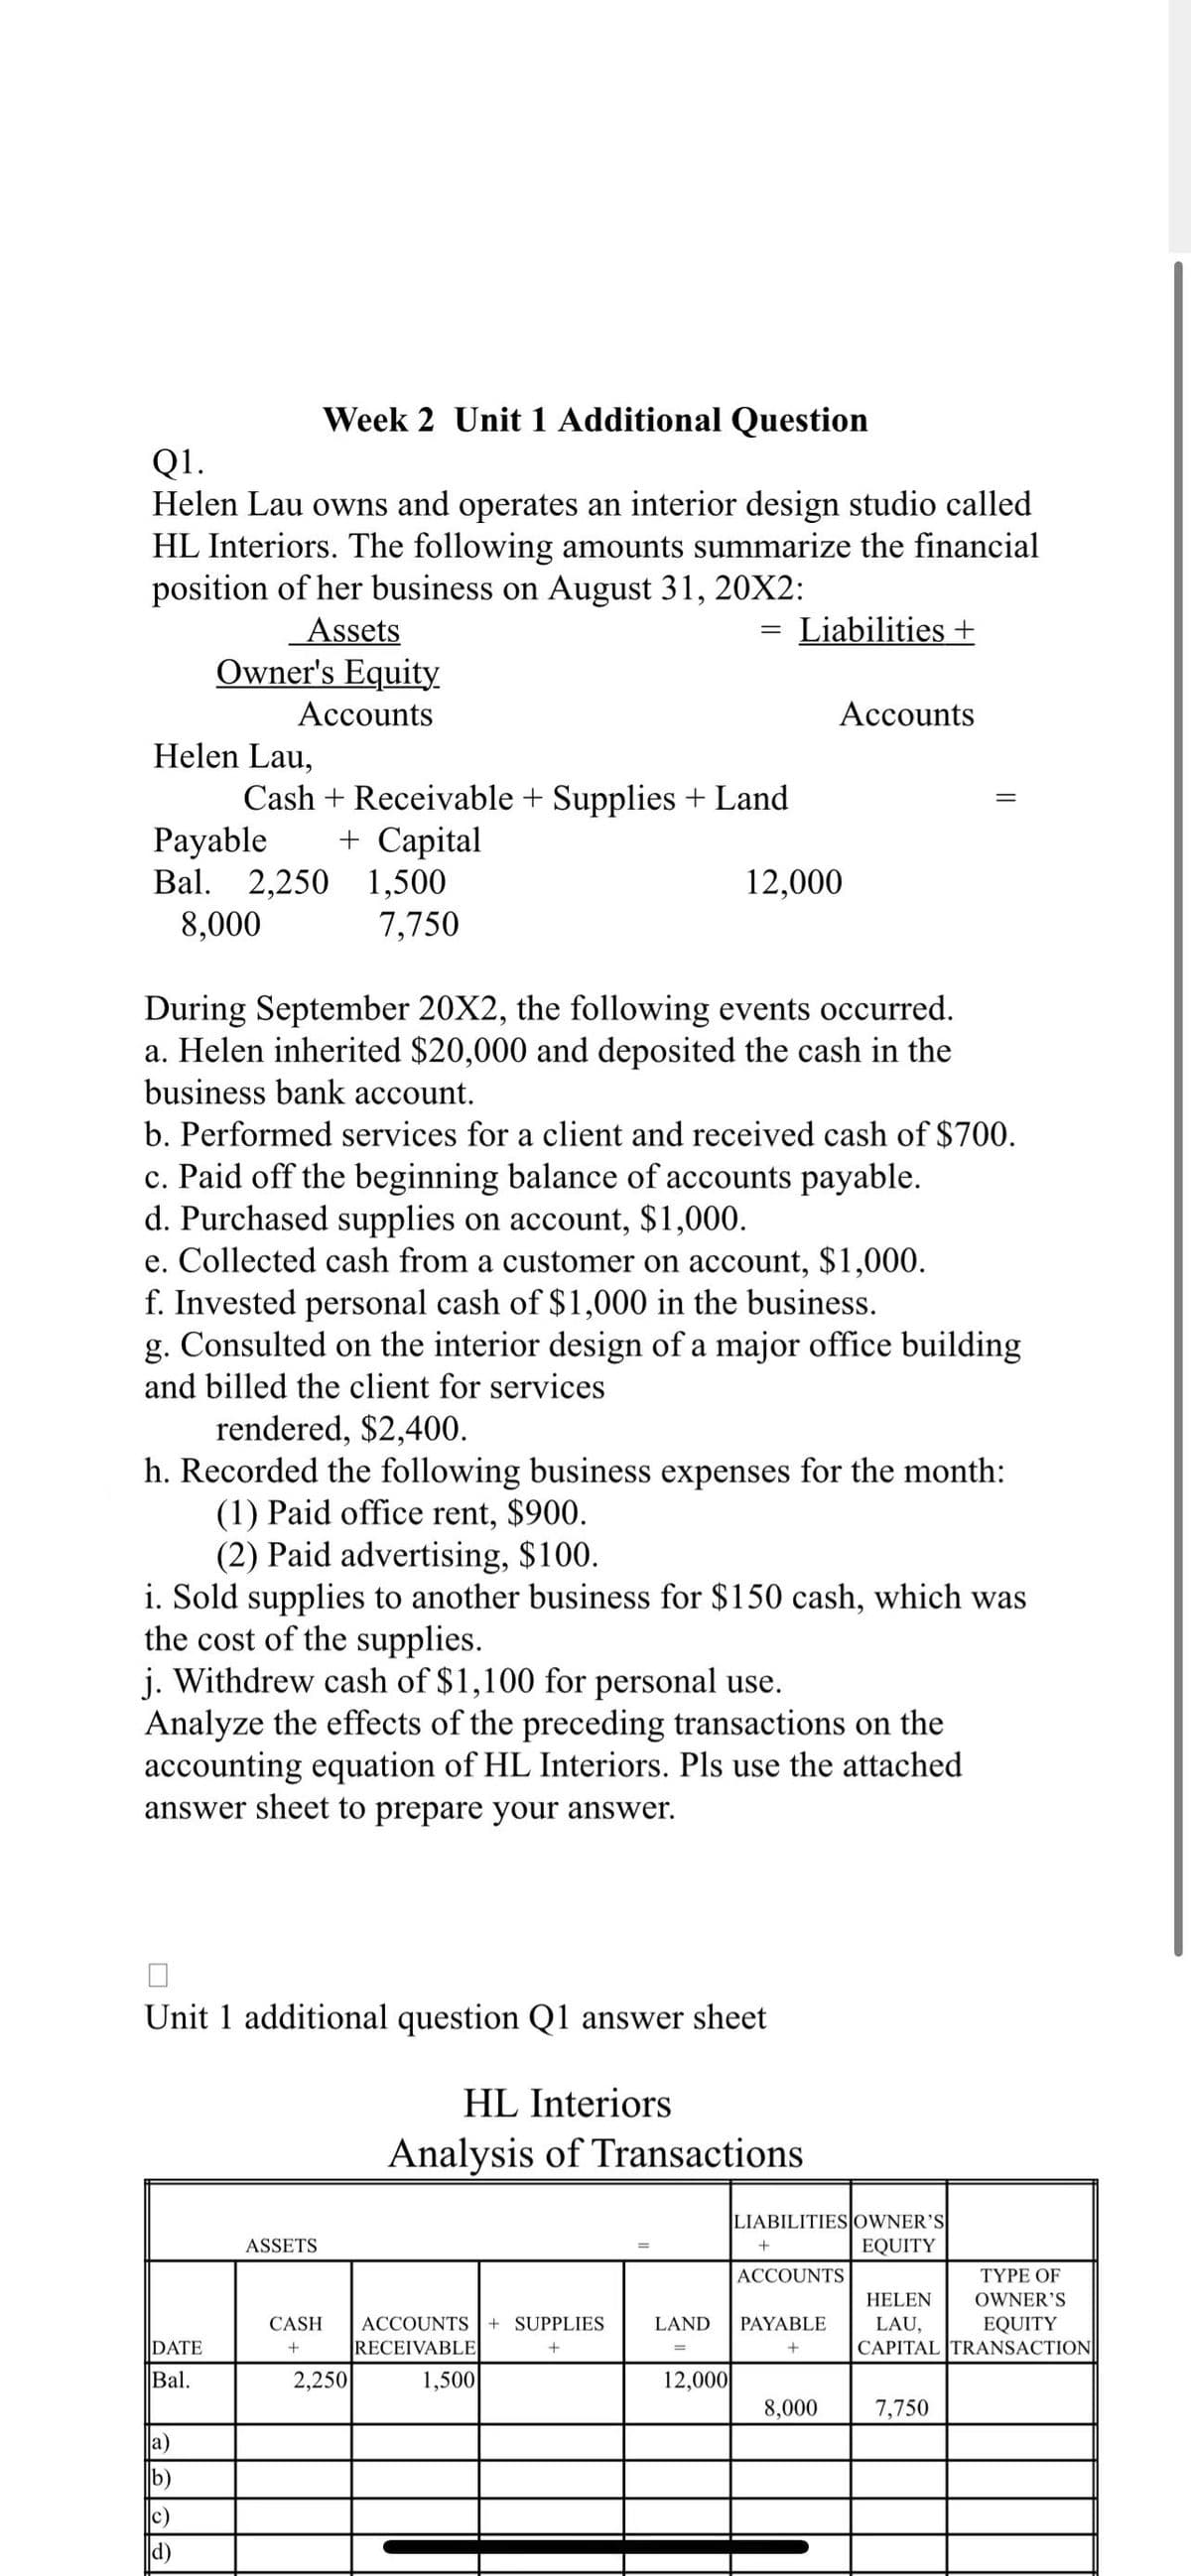 Week 2 Unit 1 Additional Question
Q1.
Helen Lau owns and operates an interior design studio called
HL Interiors. The following amounts summarize the financial
position of her business on August 31, 20X2:
Assets
= Liabilities +
Helen Lau,
Owner's Equity
Accounts
Payable
Bal. 2,250 1,500
8,000
7,750
Cash + Receivable + Supplies + Land
+ Capital
During September 20X2, the following events occurred.
a. Helen inherited $20,000 and deposited the cash in the
business bank account.
b. Performed services for a client and received cash of $700.
c. Paid off the beginning balance of accounts payable.
d. Purchased supplies on account, $1,000.
e. Collected cash from a customer on account, $1,000.
f. Invested personal cash of $1,000 in the business.
g. Consulted on the interior design of a major office building
and billed the client for services
rendered, $2,400.
h. Recorded the following business expenses for the month:
(1) Paid office rent, $900.
(2) Paid advertising, $100.
DATE
Bal.
i. Sold supplies to another business for $150 cash, which was
the cost of the supplies.
a)
b)
c)
d)
j. Withdrew cash of $1,100 for personal use.
Analyze the effects of the preceding transactions on the
accounting equation of HL Interiors. Pls use the attached
answer sheet to prepare your answer.
Unit 1 additional question Q1 answer sheet
12,000
ASSETS
CASH
+
2,250
Accounts
HL Interiors
Analysis of Transactions
ACCOUNTS + SUPPLIES
RECEIVABLE
+
1,500
LAND
=
12,000
LIABILITIES OWNER'S
EQUITY
+
ACCOUNTS
PAYABLE
+
8,000
TYPE OF
HELEN
OWNER'S
LAU, EQUITY
CAPITAL TRANSACTION
7,750